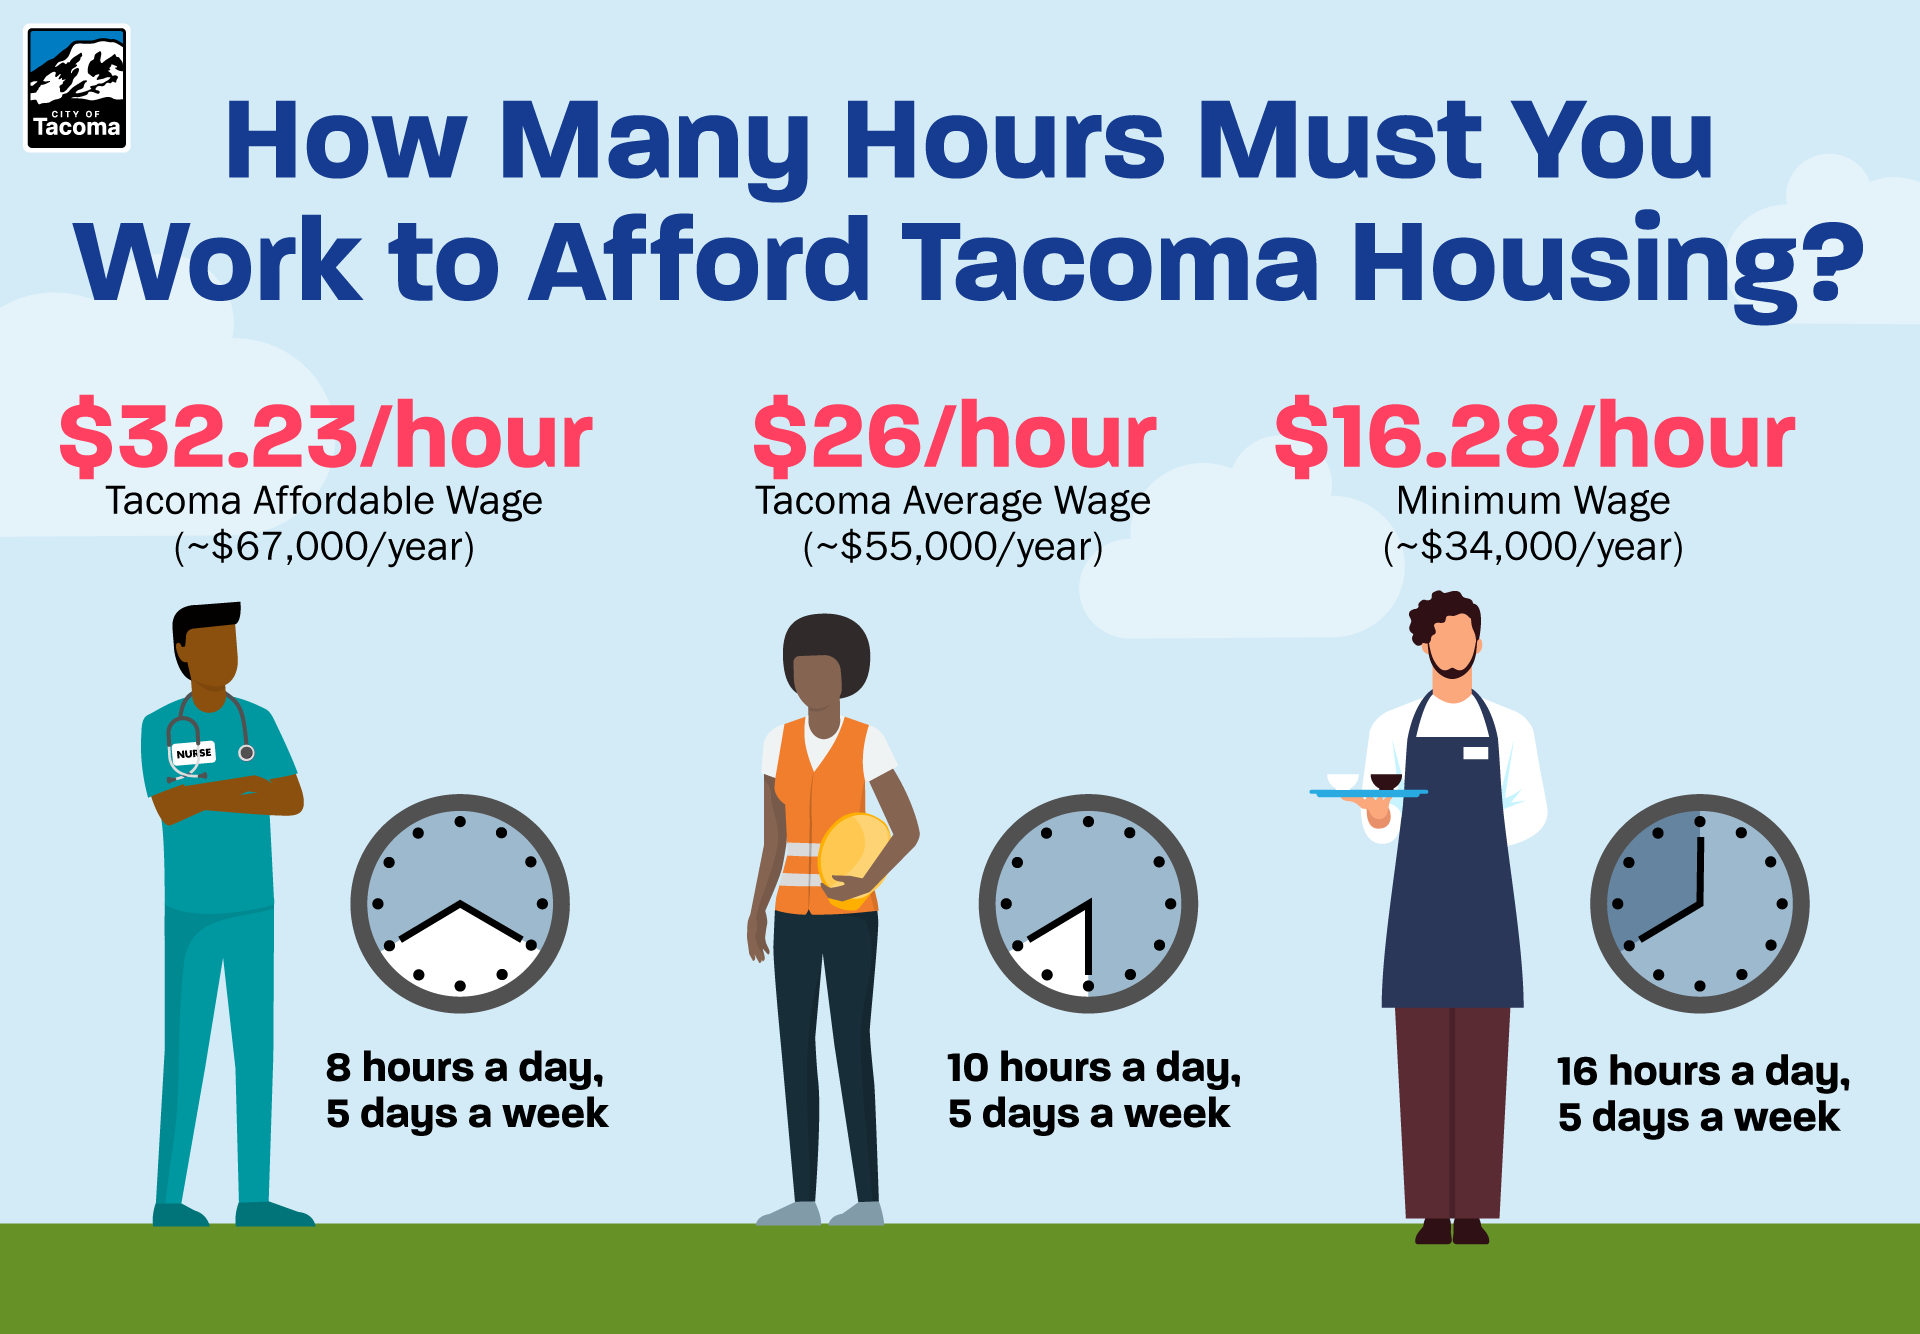 infographic showing how many hours worked at various wages to afford housing